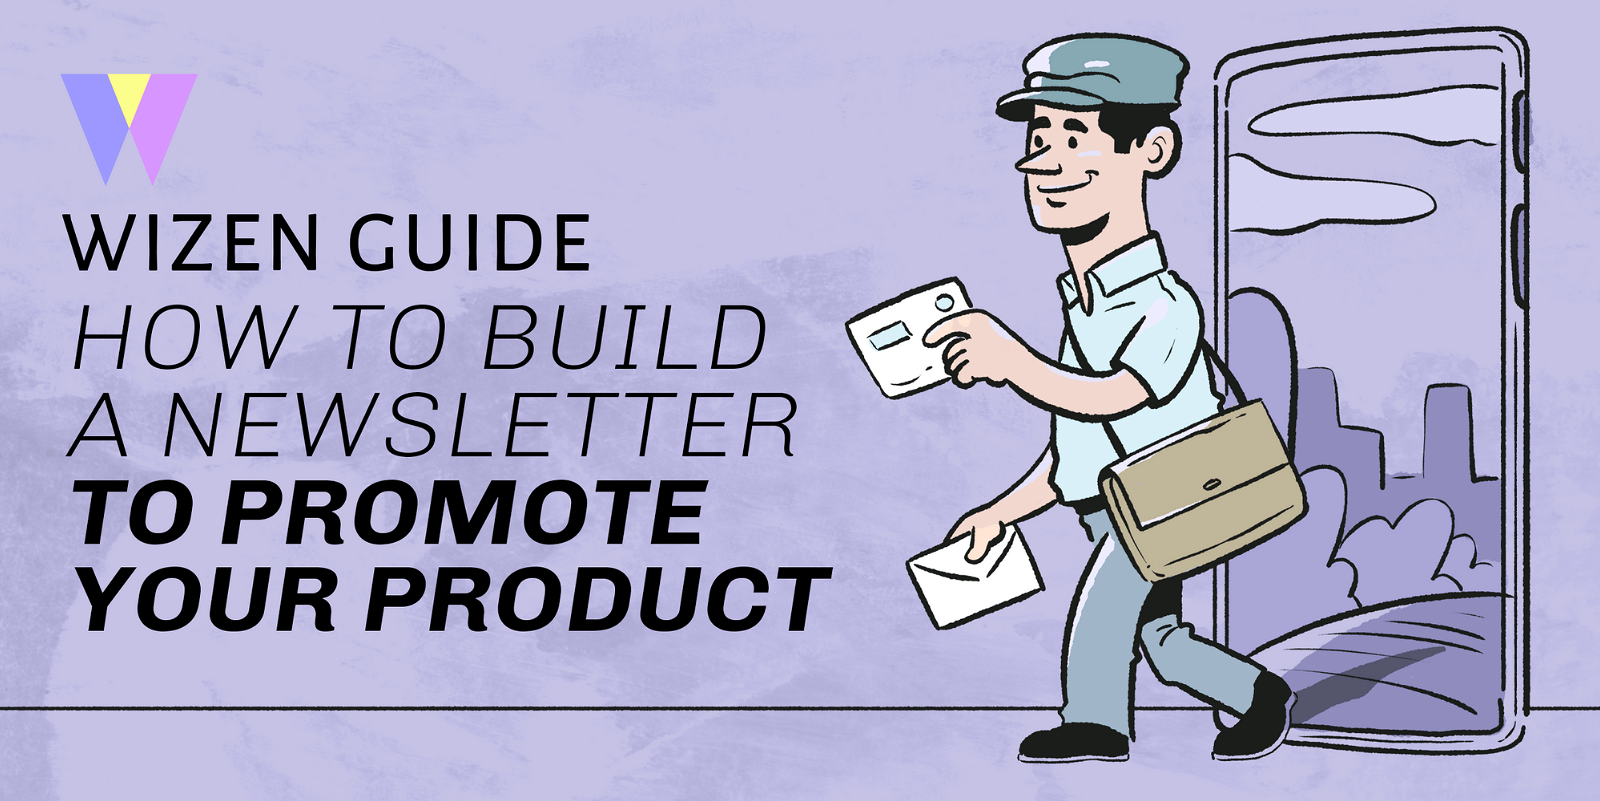 How to build a newsletter to promote your product